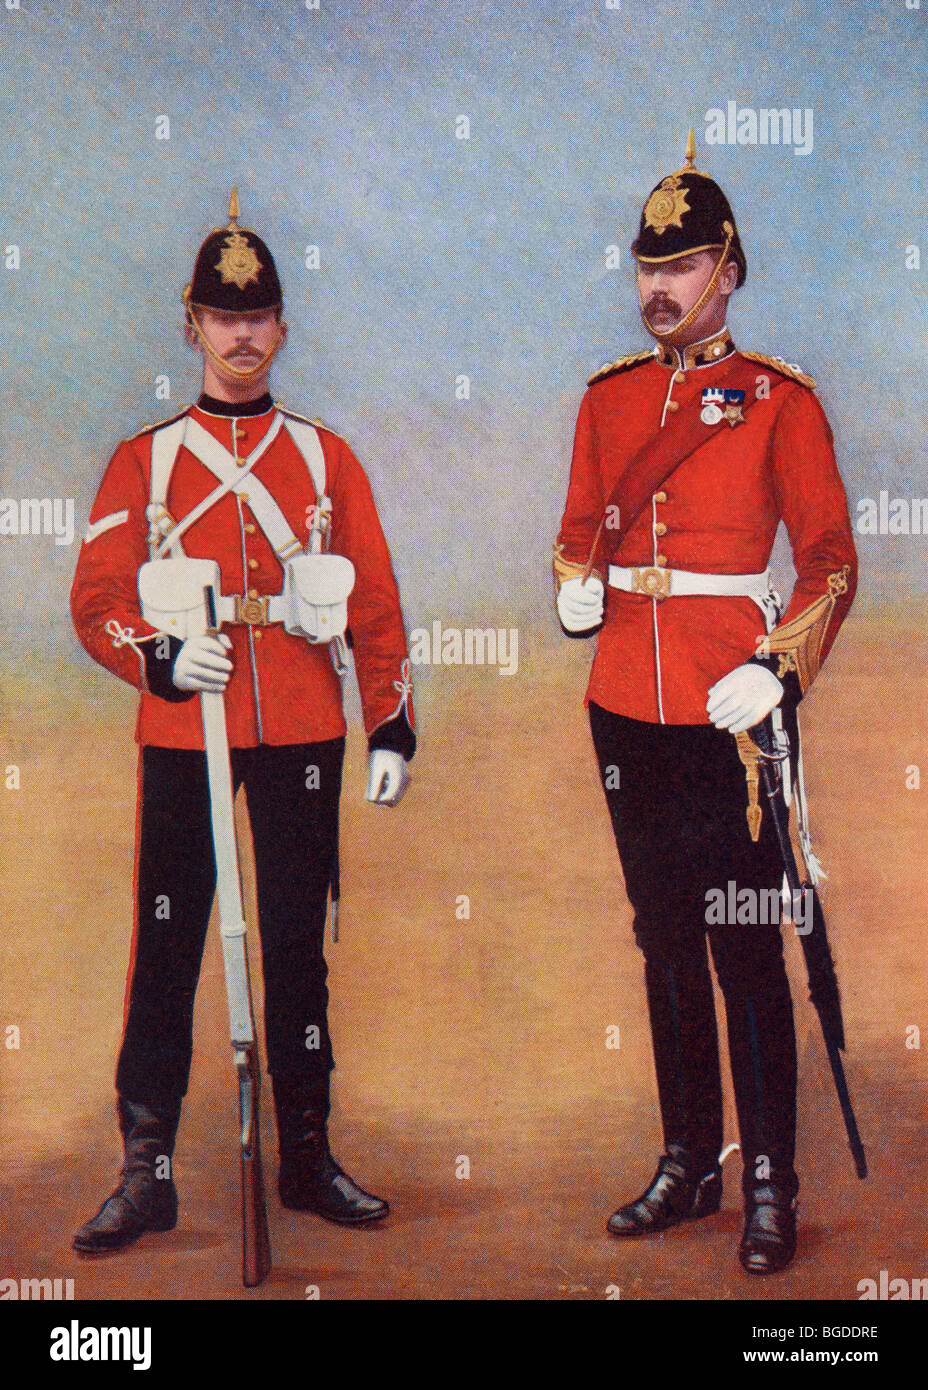 Uniforms of the Royal Marines in the late 19th century. Stock Photo